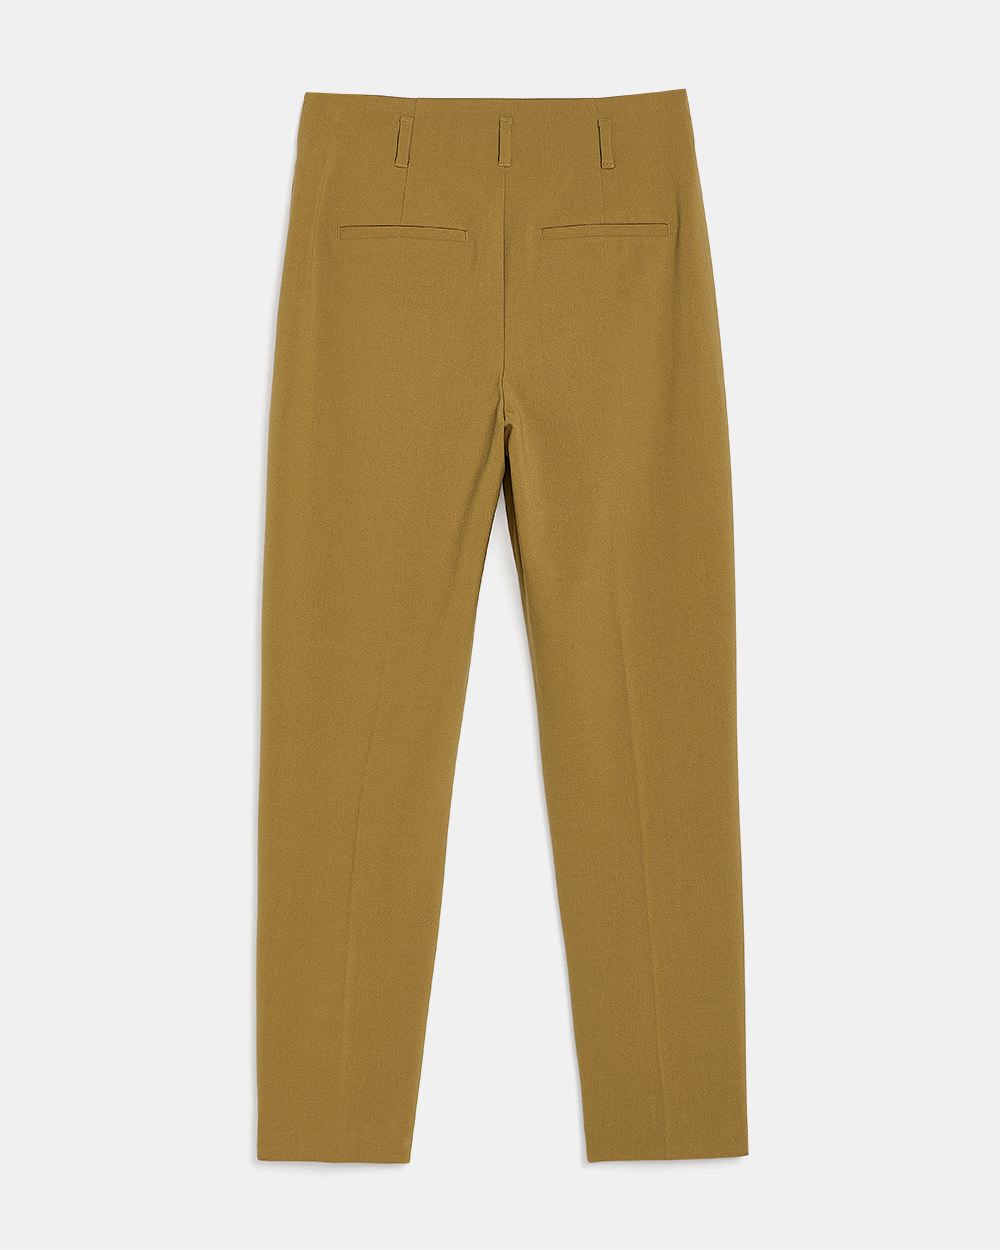 High-Waist Tapered Ankle Pant - 28"